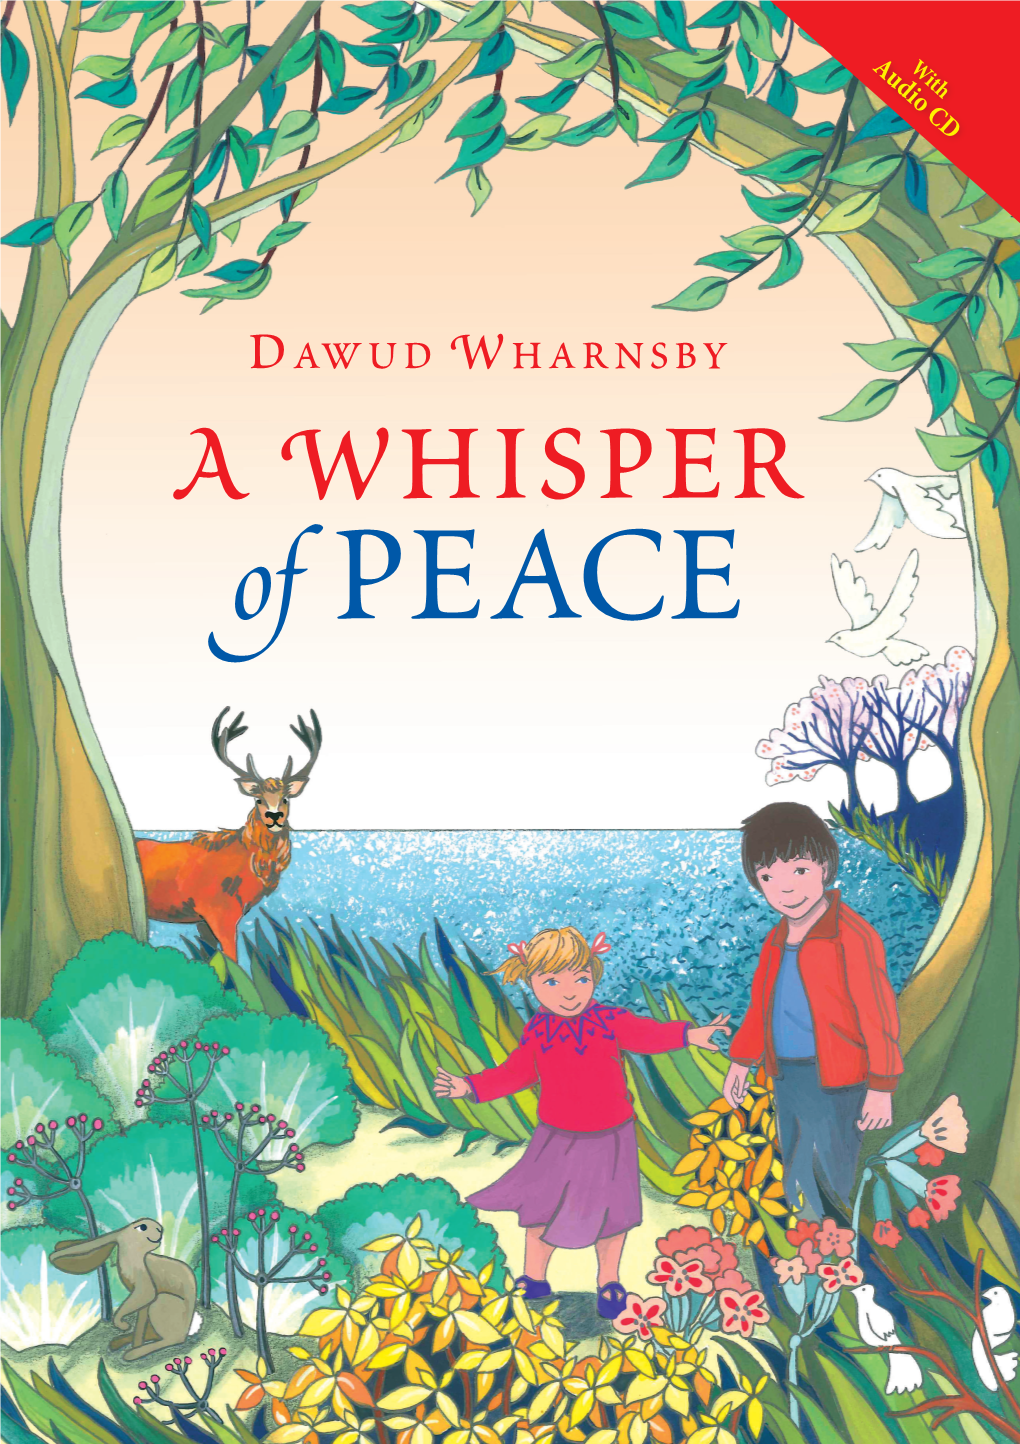 Dawud Wharnsby in a Whisper of Peace